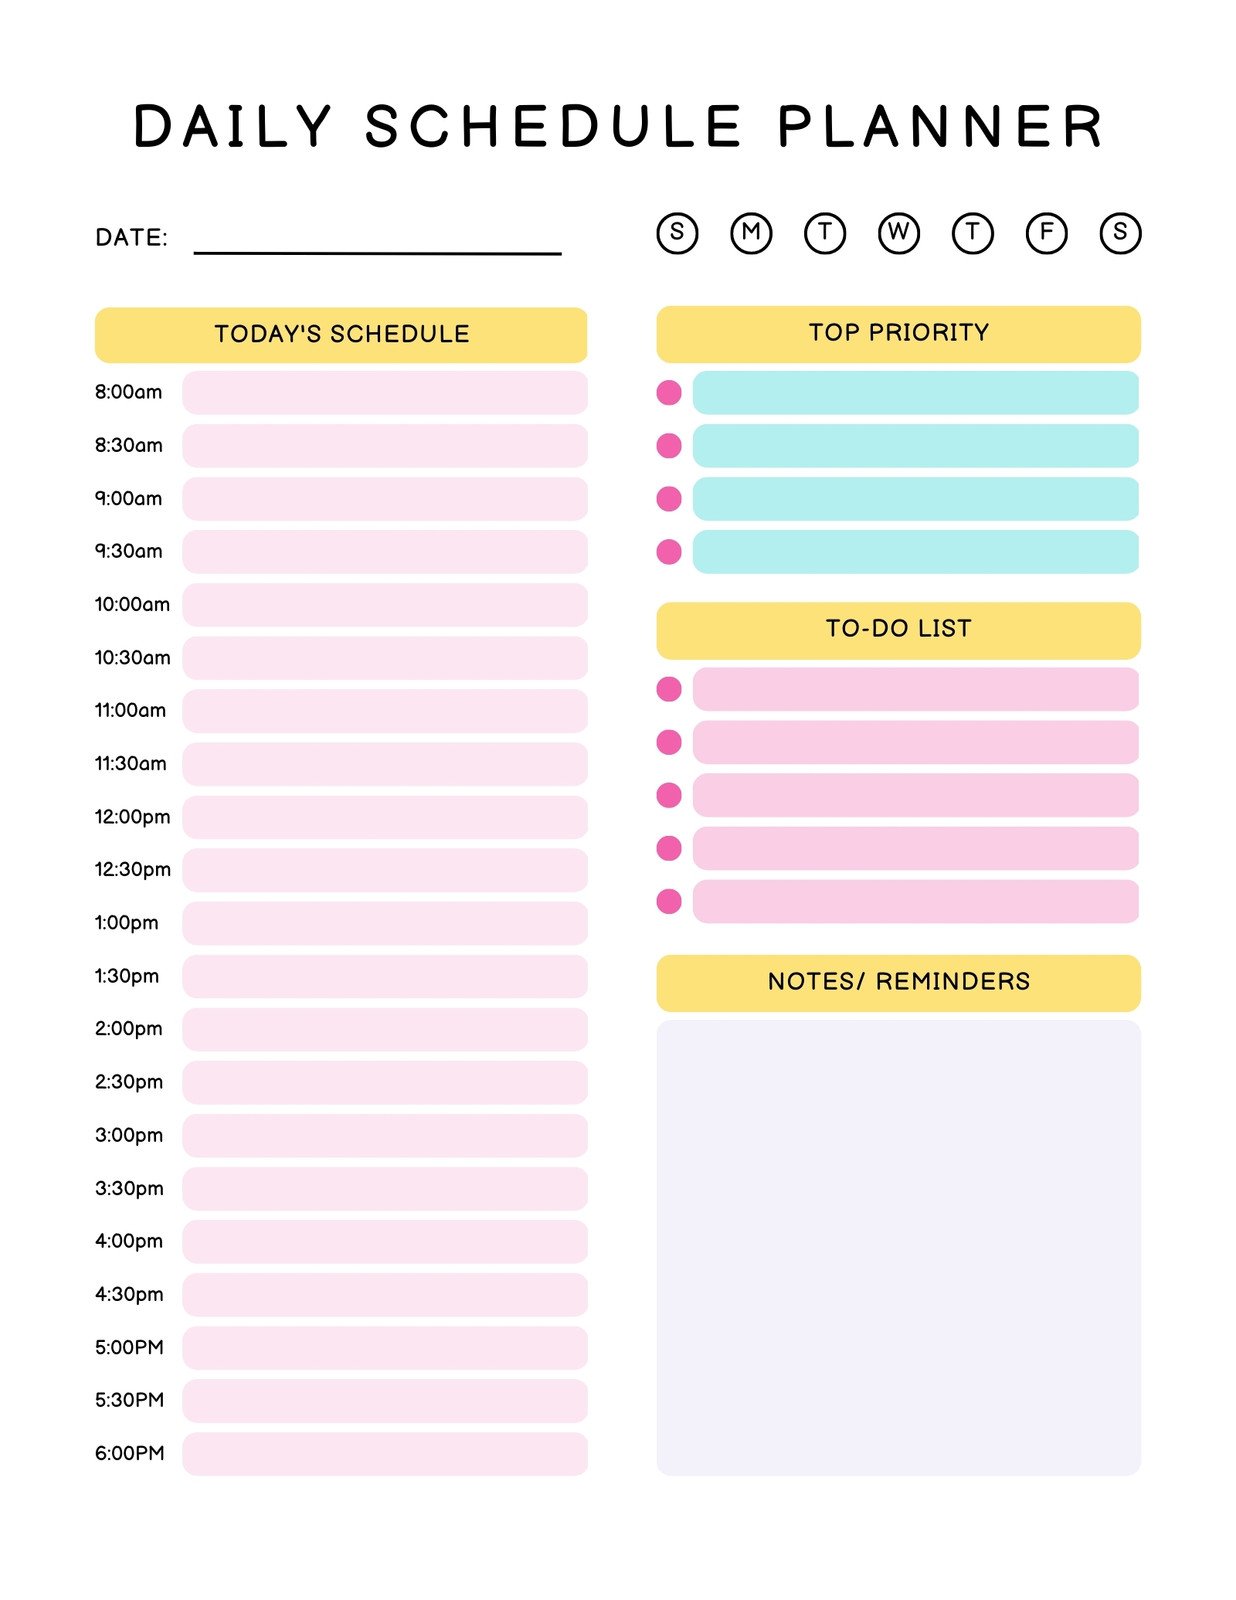 Free daily planner templates to customize